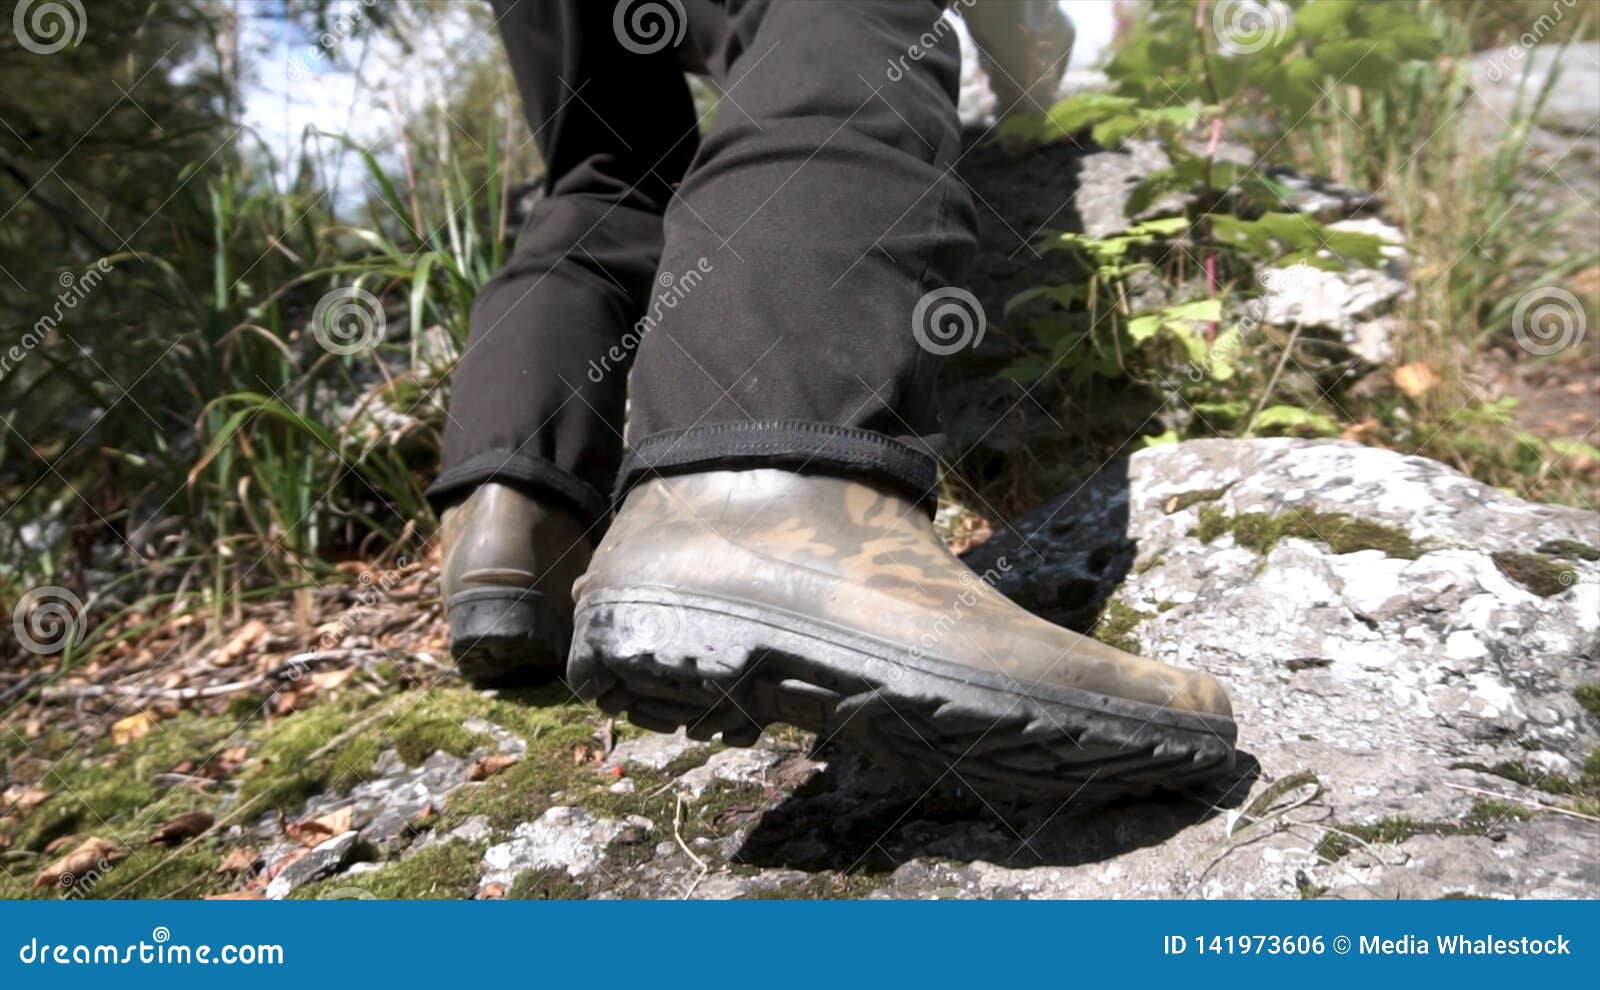 rubber boots for hiking